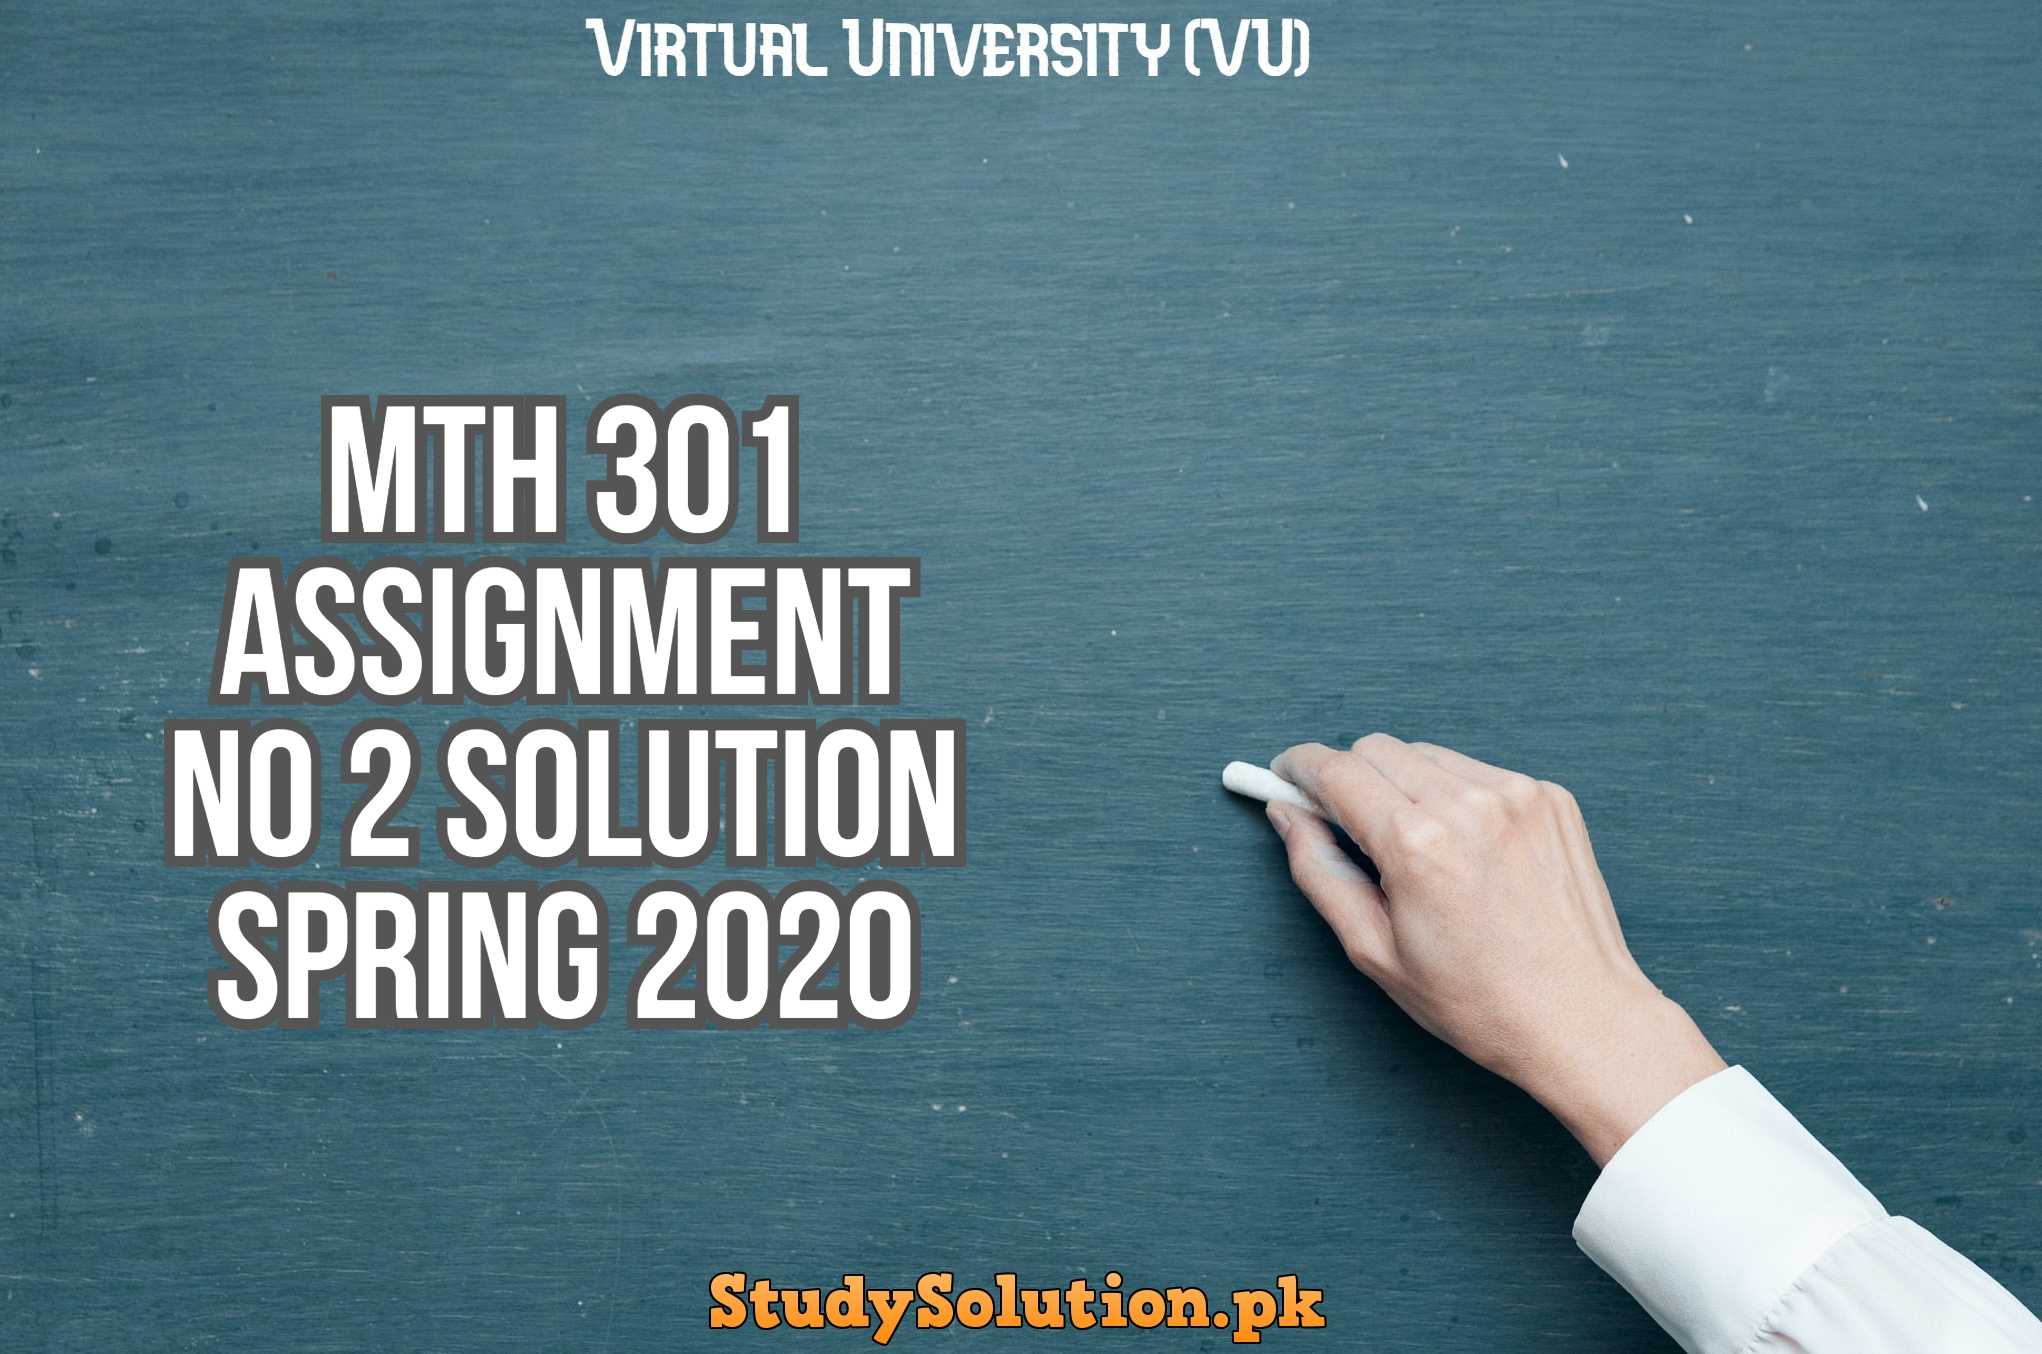 MTH 301 Assignment No 2 Solution Spring 2020